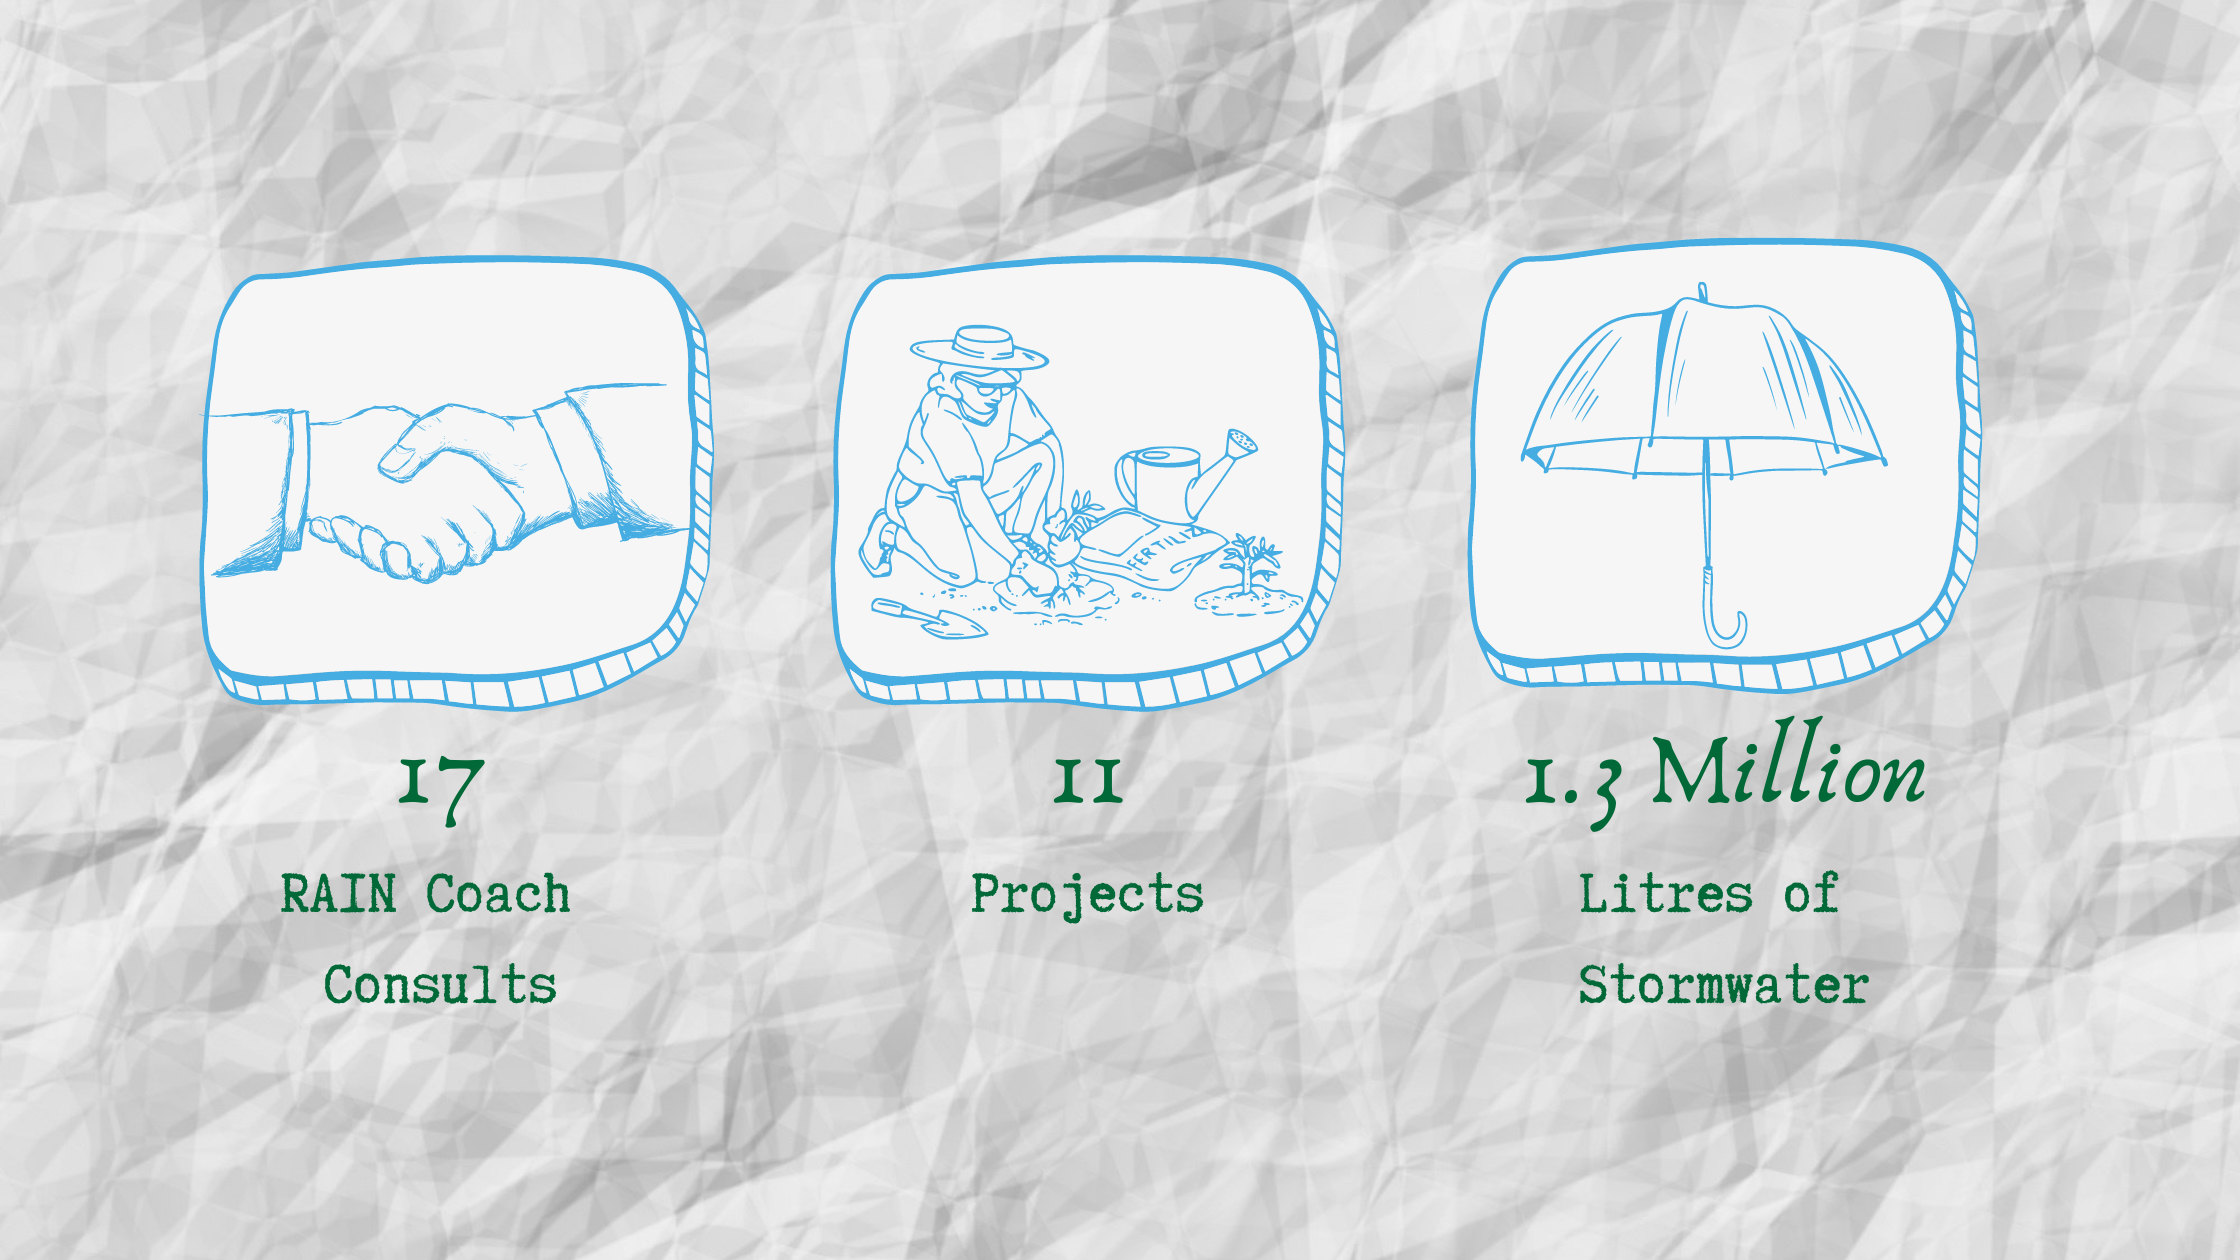 three graphics, 17 RAIN Coach Consults, 11 Projects 1.3 Million litres of stormwater